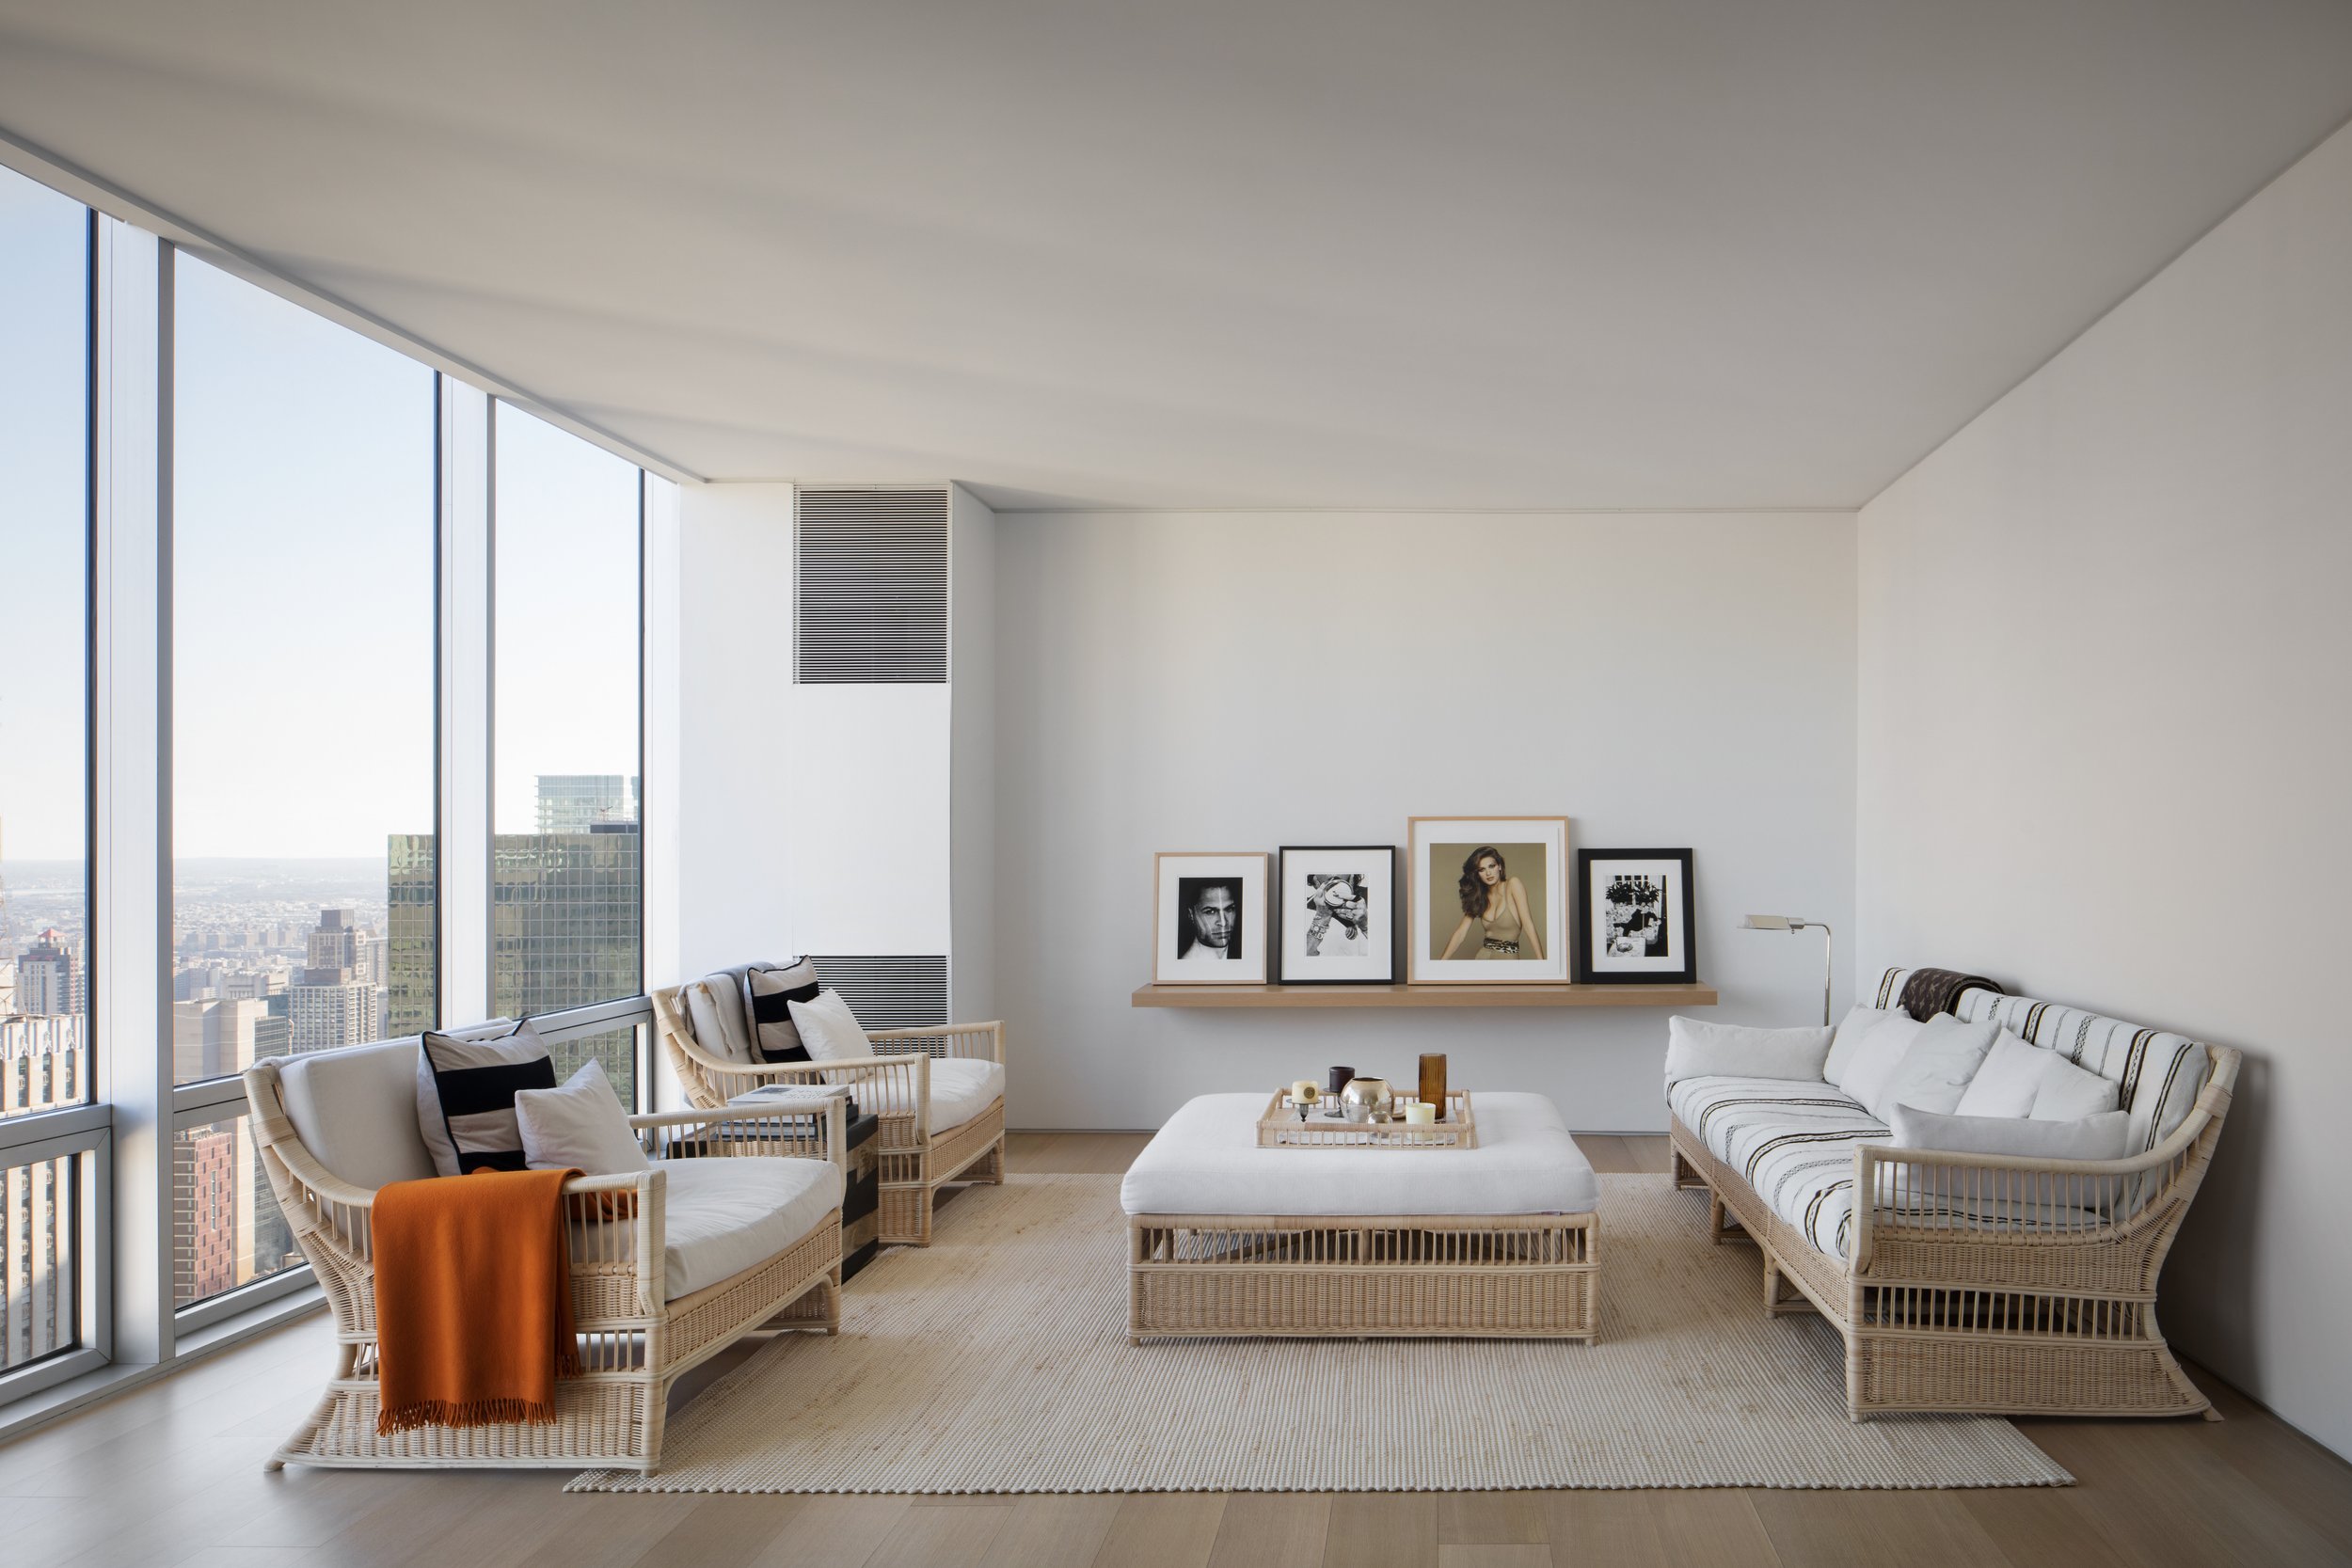 1100 Architect_Fifth Ave Pied a Terre_02.jpg